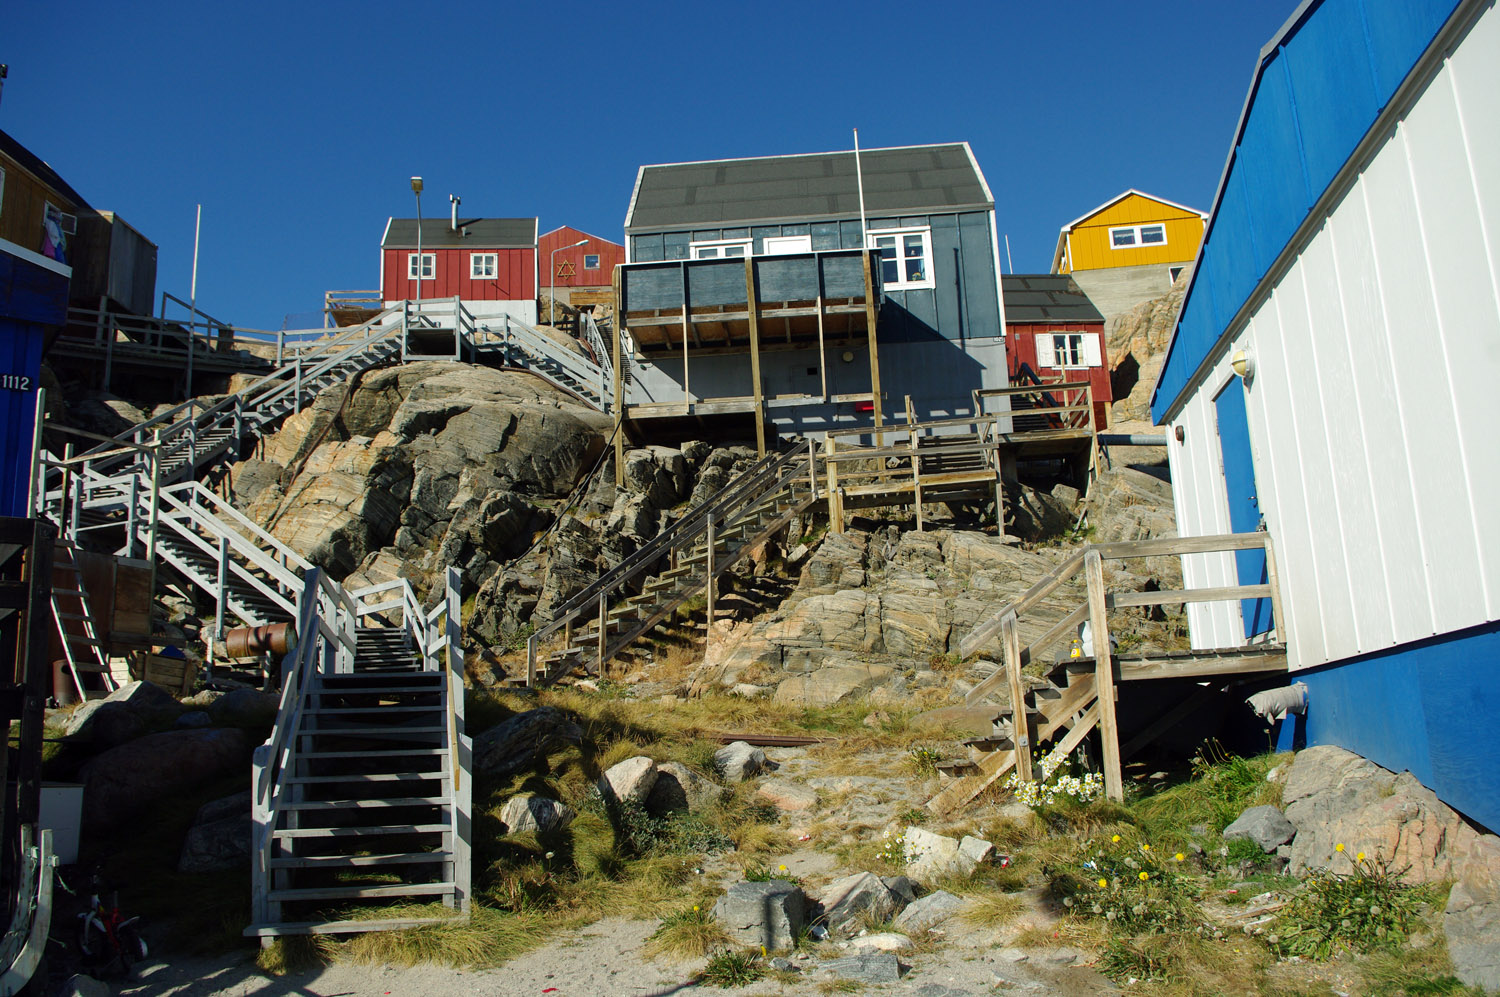 Uummannaq Town, Greenland, Houses Placed for the View Rather Than Convenience